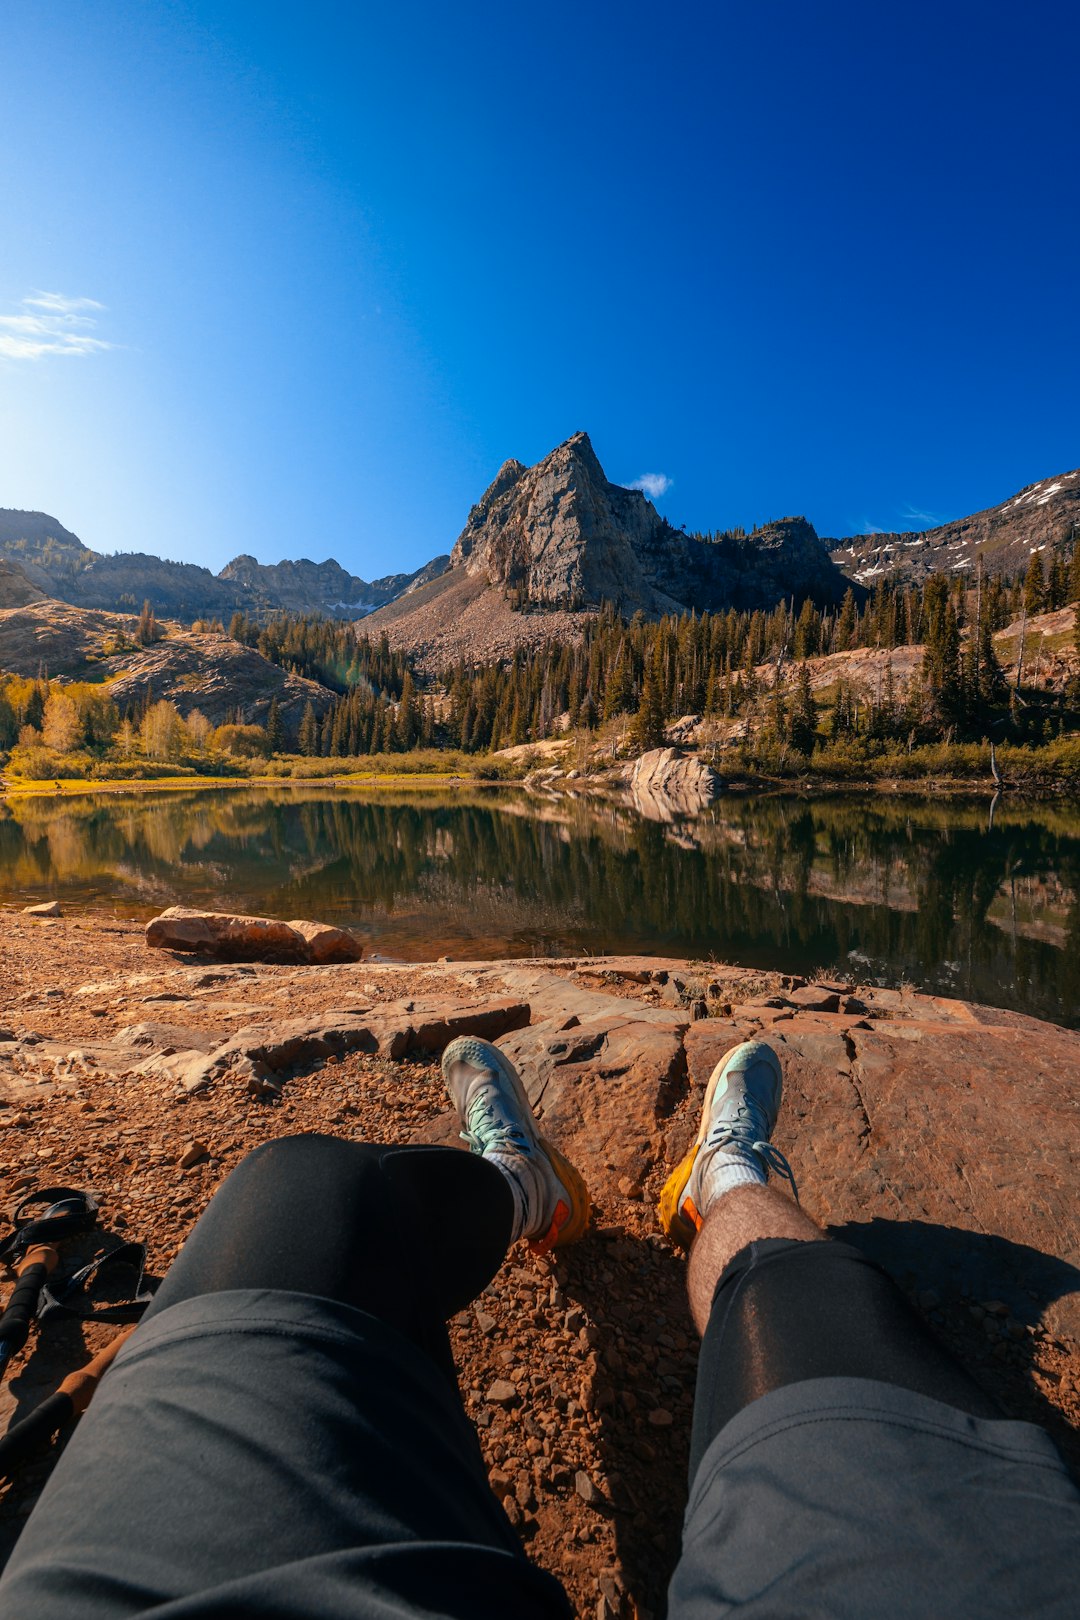 person in black pants and gray sneakers sitting on rock near lake during daytime